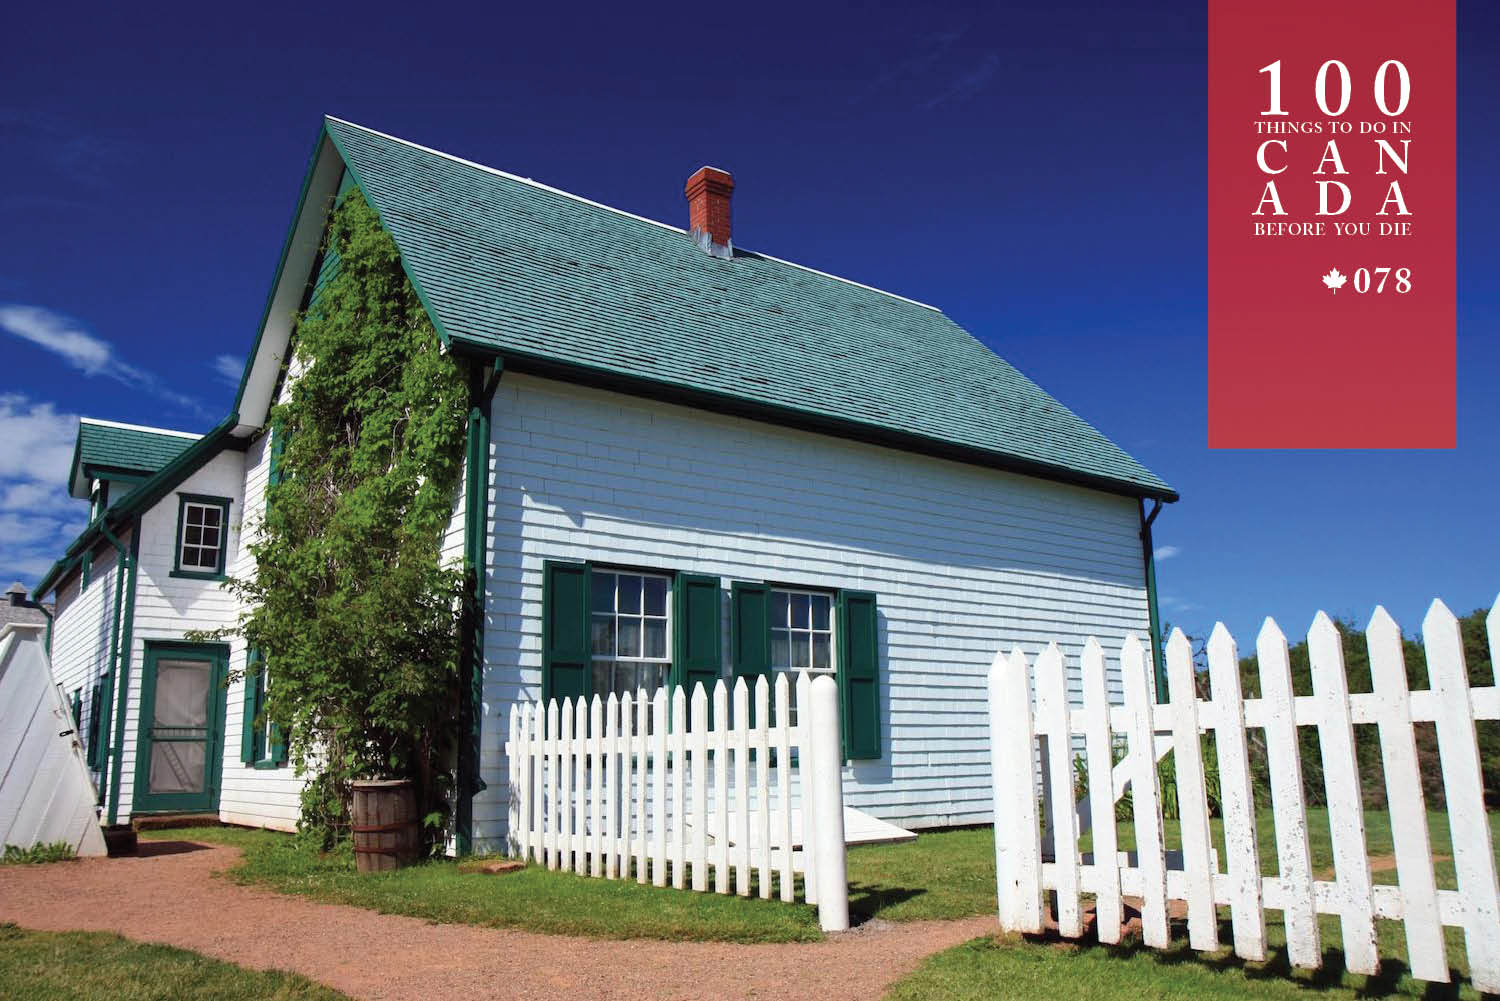 Step into the island home of Canada's beloved Anne of Green Gables